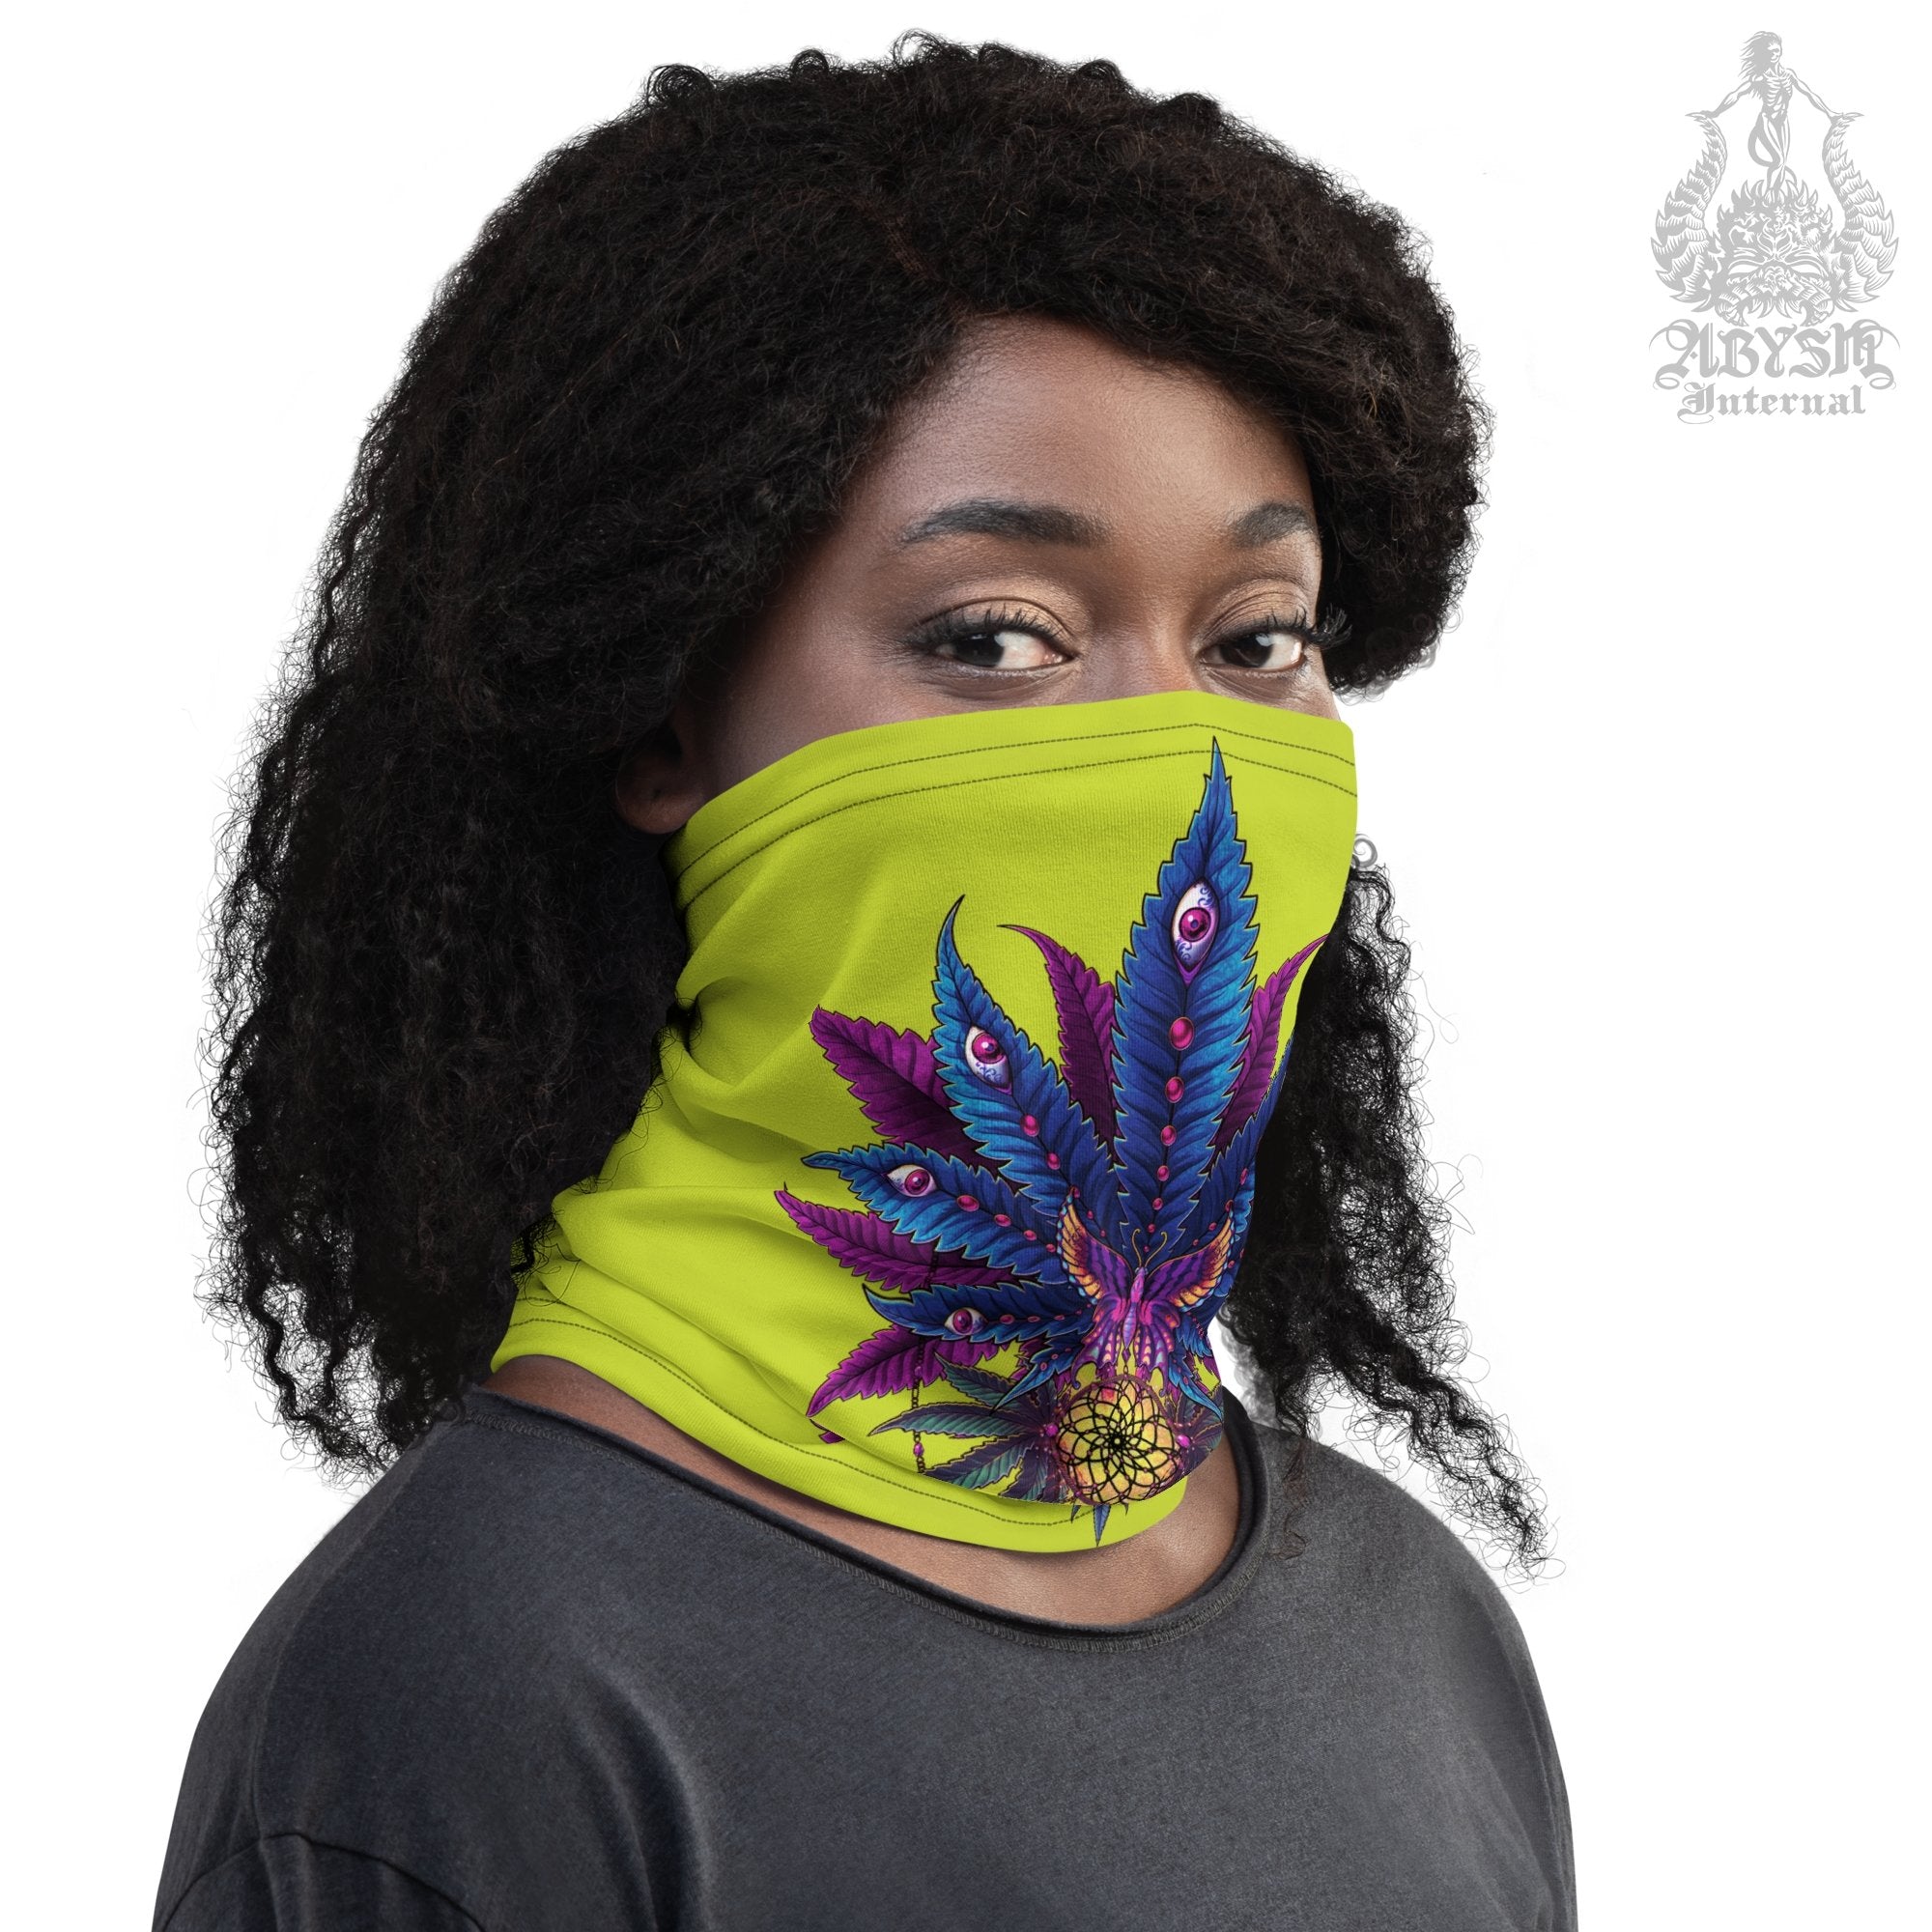 Weed Neck Gaiter, Cannabis Face Mask, Marijuana Head Covering, Neon Retrowave, Festival Outfit, 420 Gift - II Green - Abysm Internal